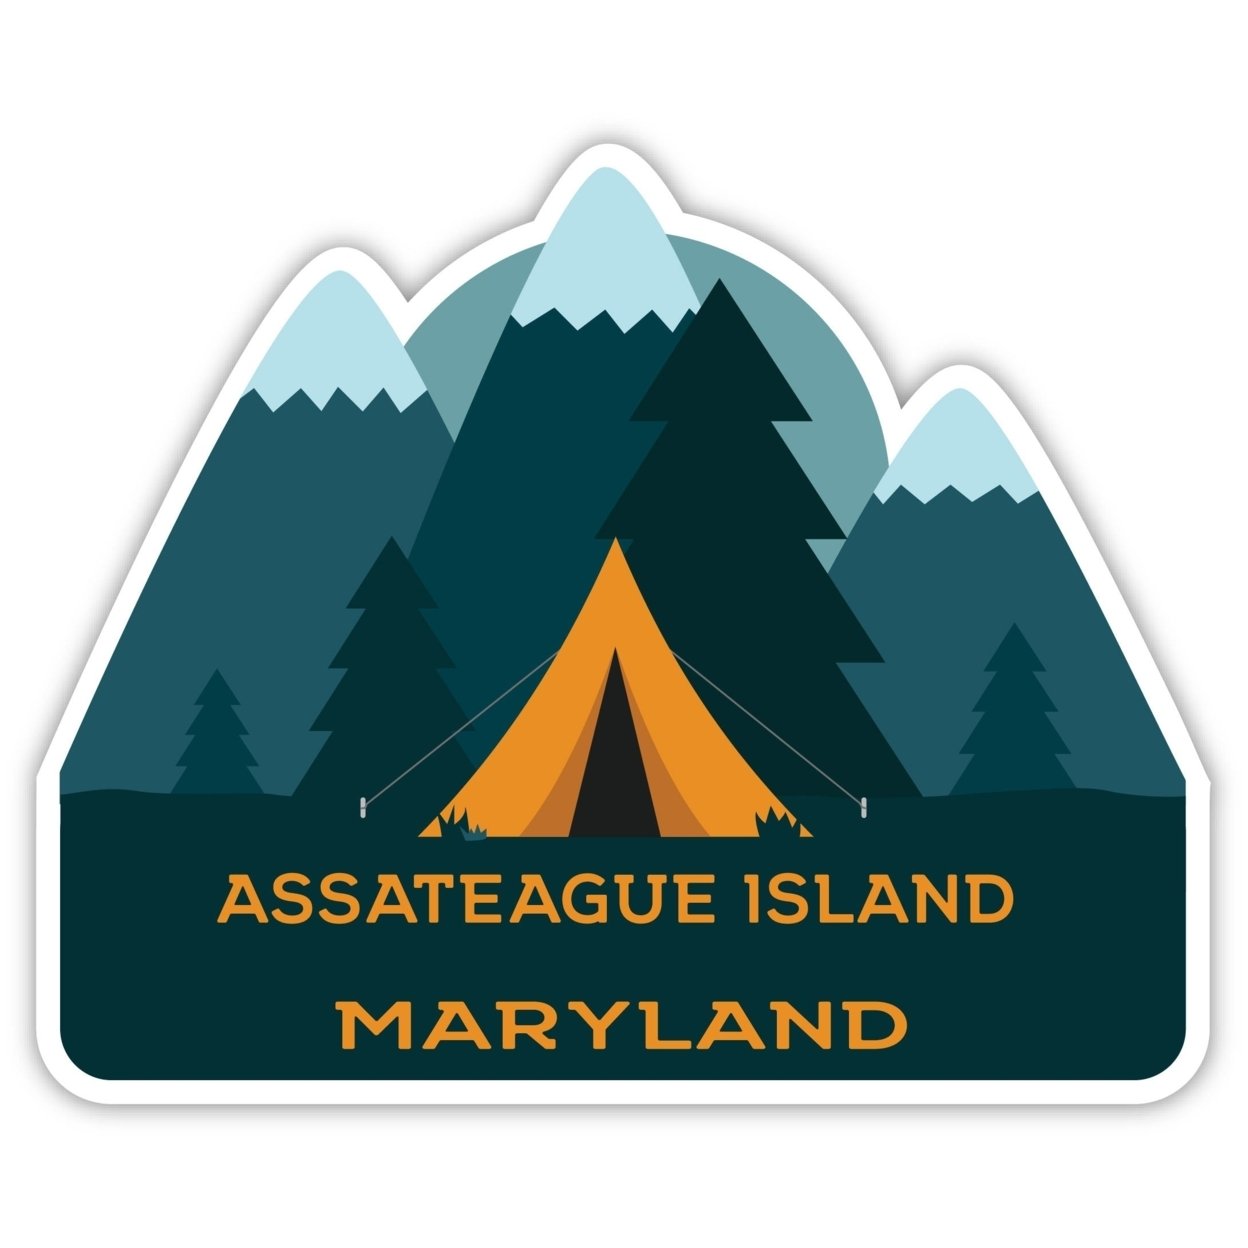 Assateague Island Maryland Souvenir Decorative Stickers (Choose Theme And Size) - 4-Pack, 4-Inch, Tent